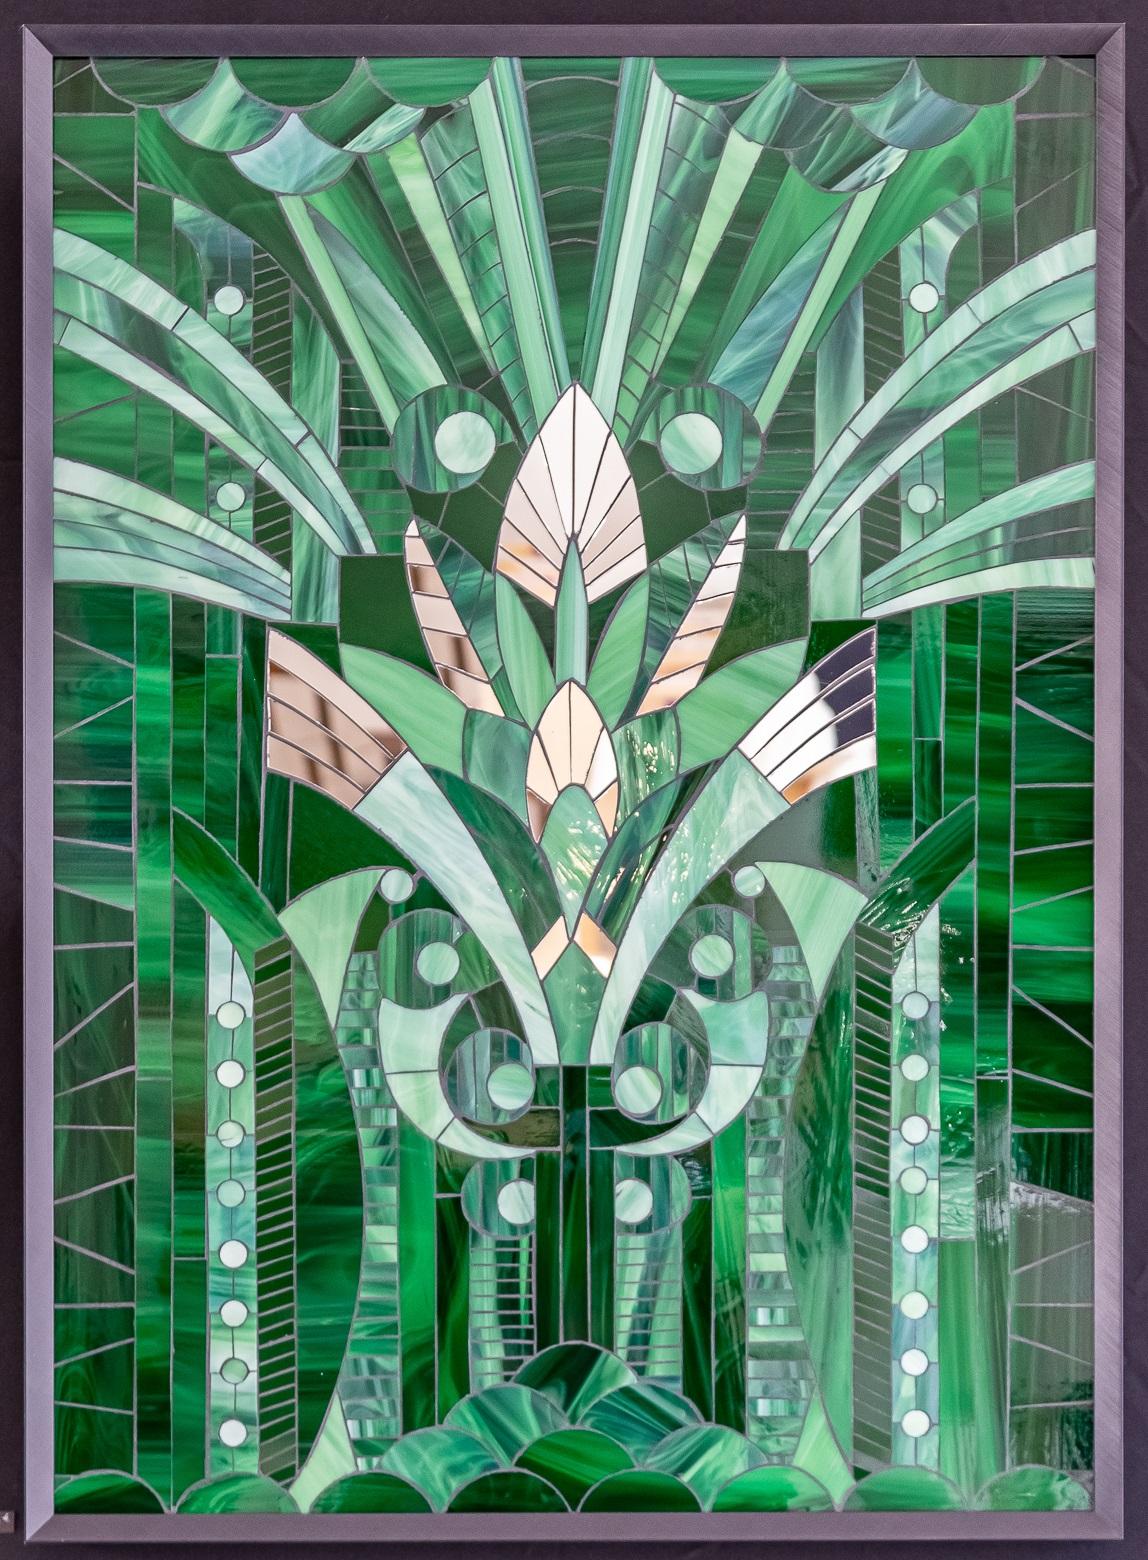 Art Déco jungle wall sculpture by Myriam Hubert.
Dimensions: W 60 x H 83 cm.
Materials: 'Glass marquetry' with mirror inlays.

Intended for residential and hotel interiors, Myriam Hubert's wall compositions evoke stained glass with a new